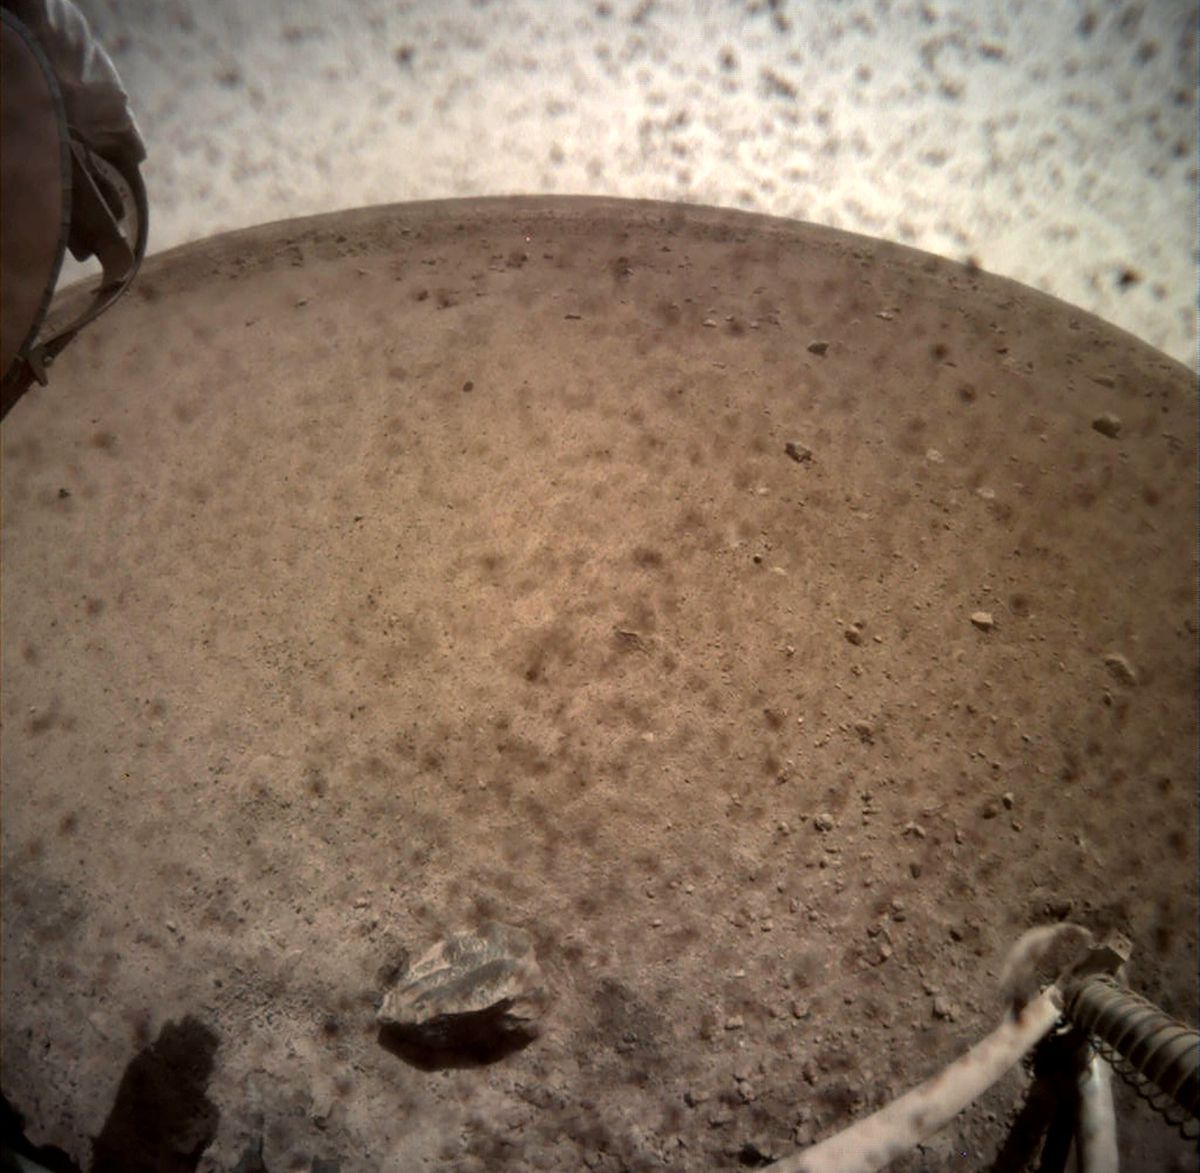 An image acquired by NASA's InSight Mars lander shows the area in front of the lander using its lander-mounted, Instrument Context Camera (ICC) on Mars November 30, 2018. Image acquired November 30, 2018. /NASA